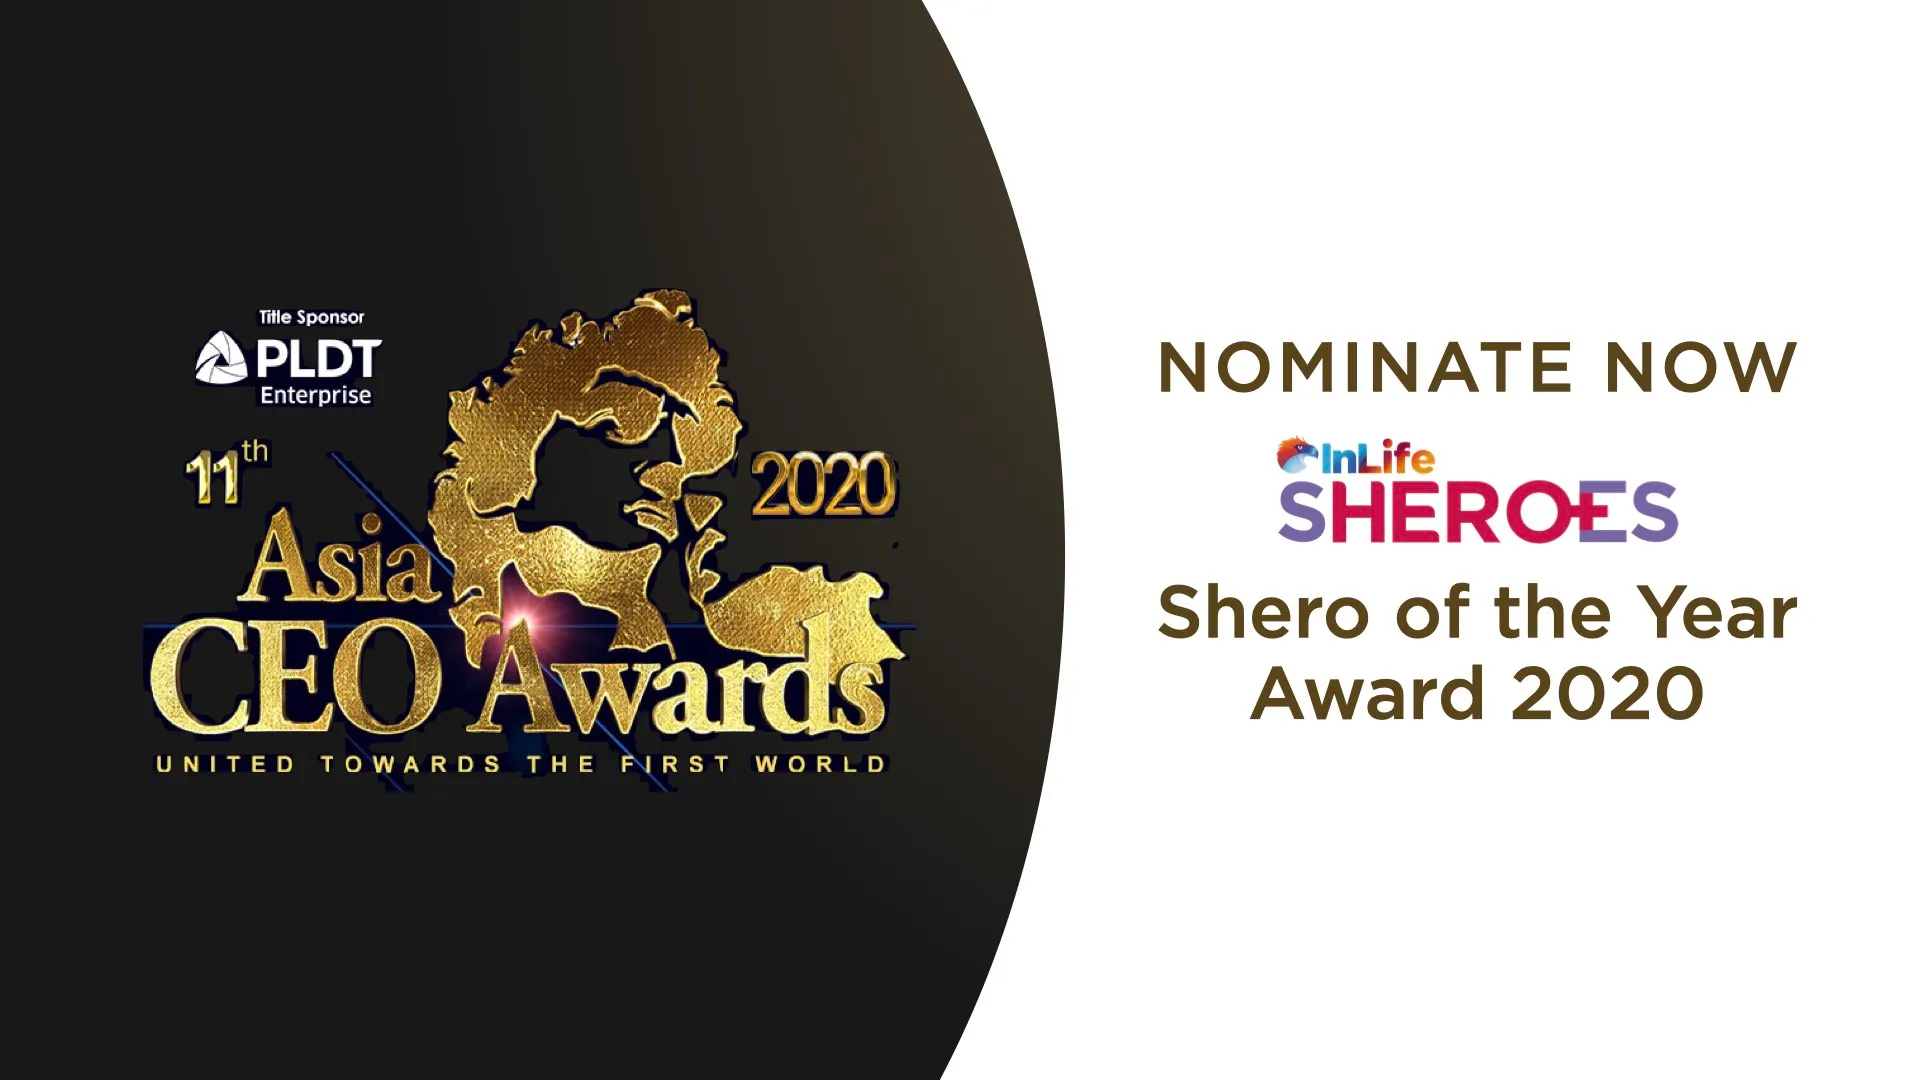 inlife-calls-for-nominations-to-the-asia-ceo-inlife-shero-of-the-year-award-2020